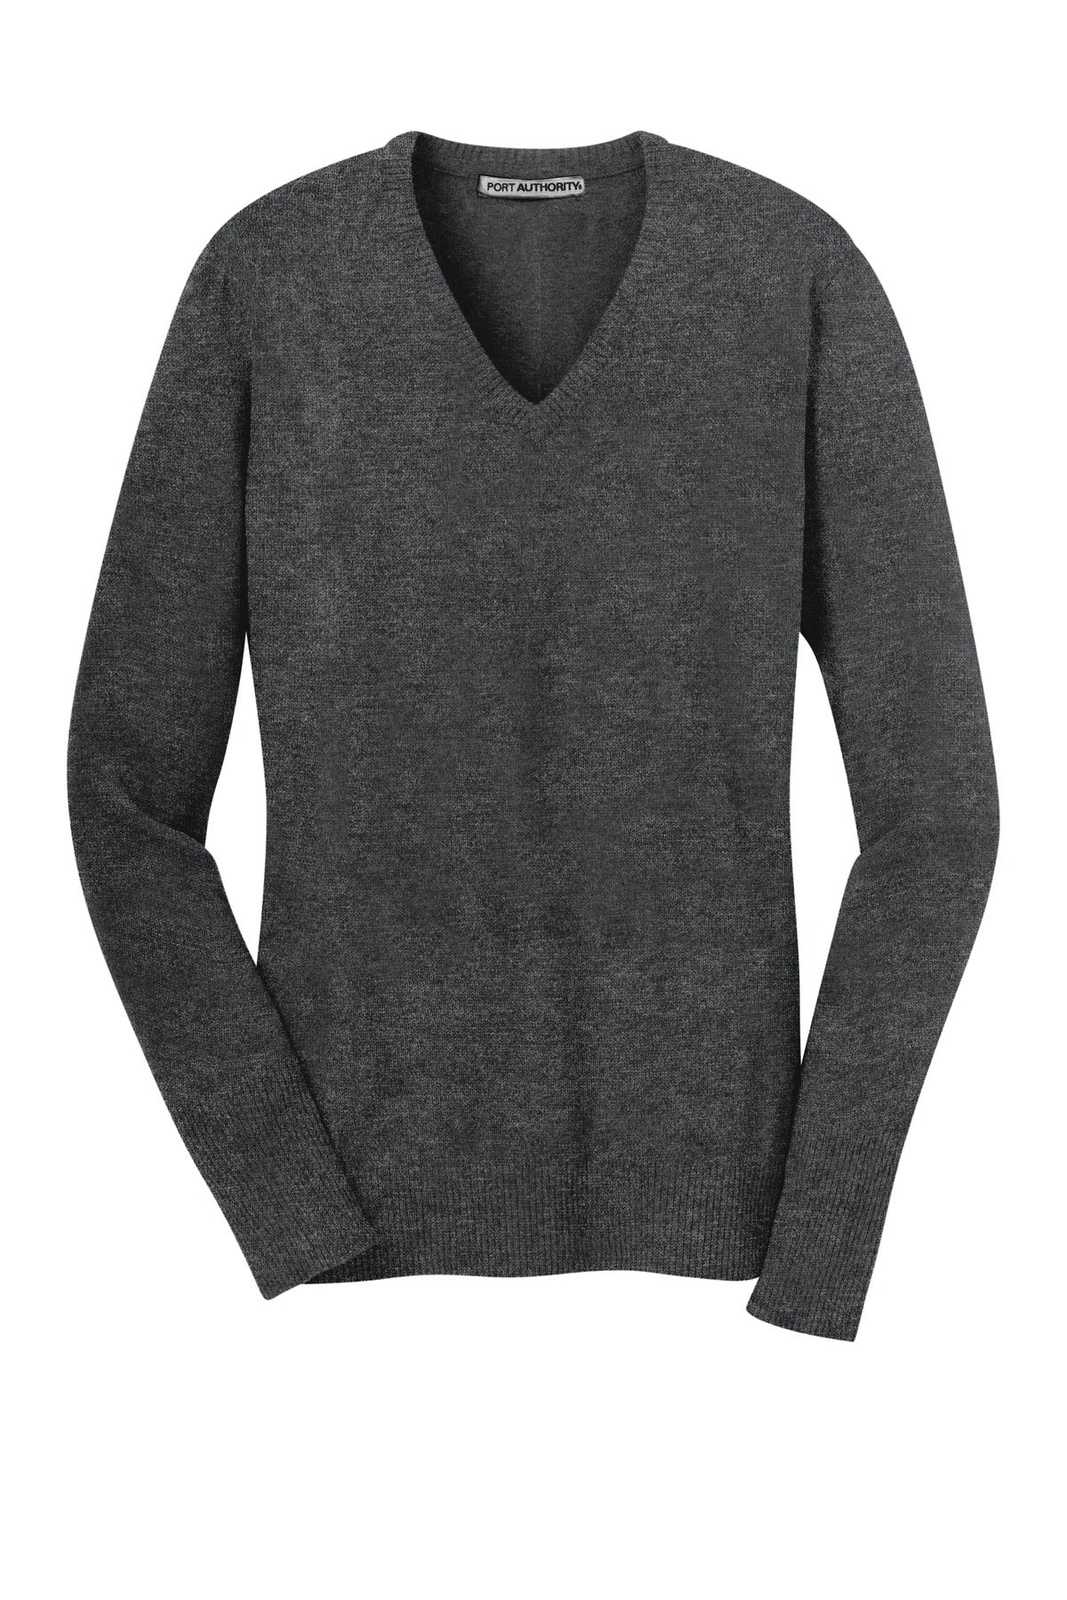 Port Authority LSW285 Ladies V-Neck Sweater - Charcoal Heather - HIT a Double - 5